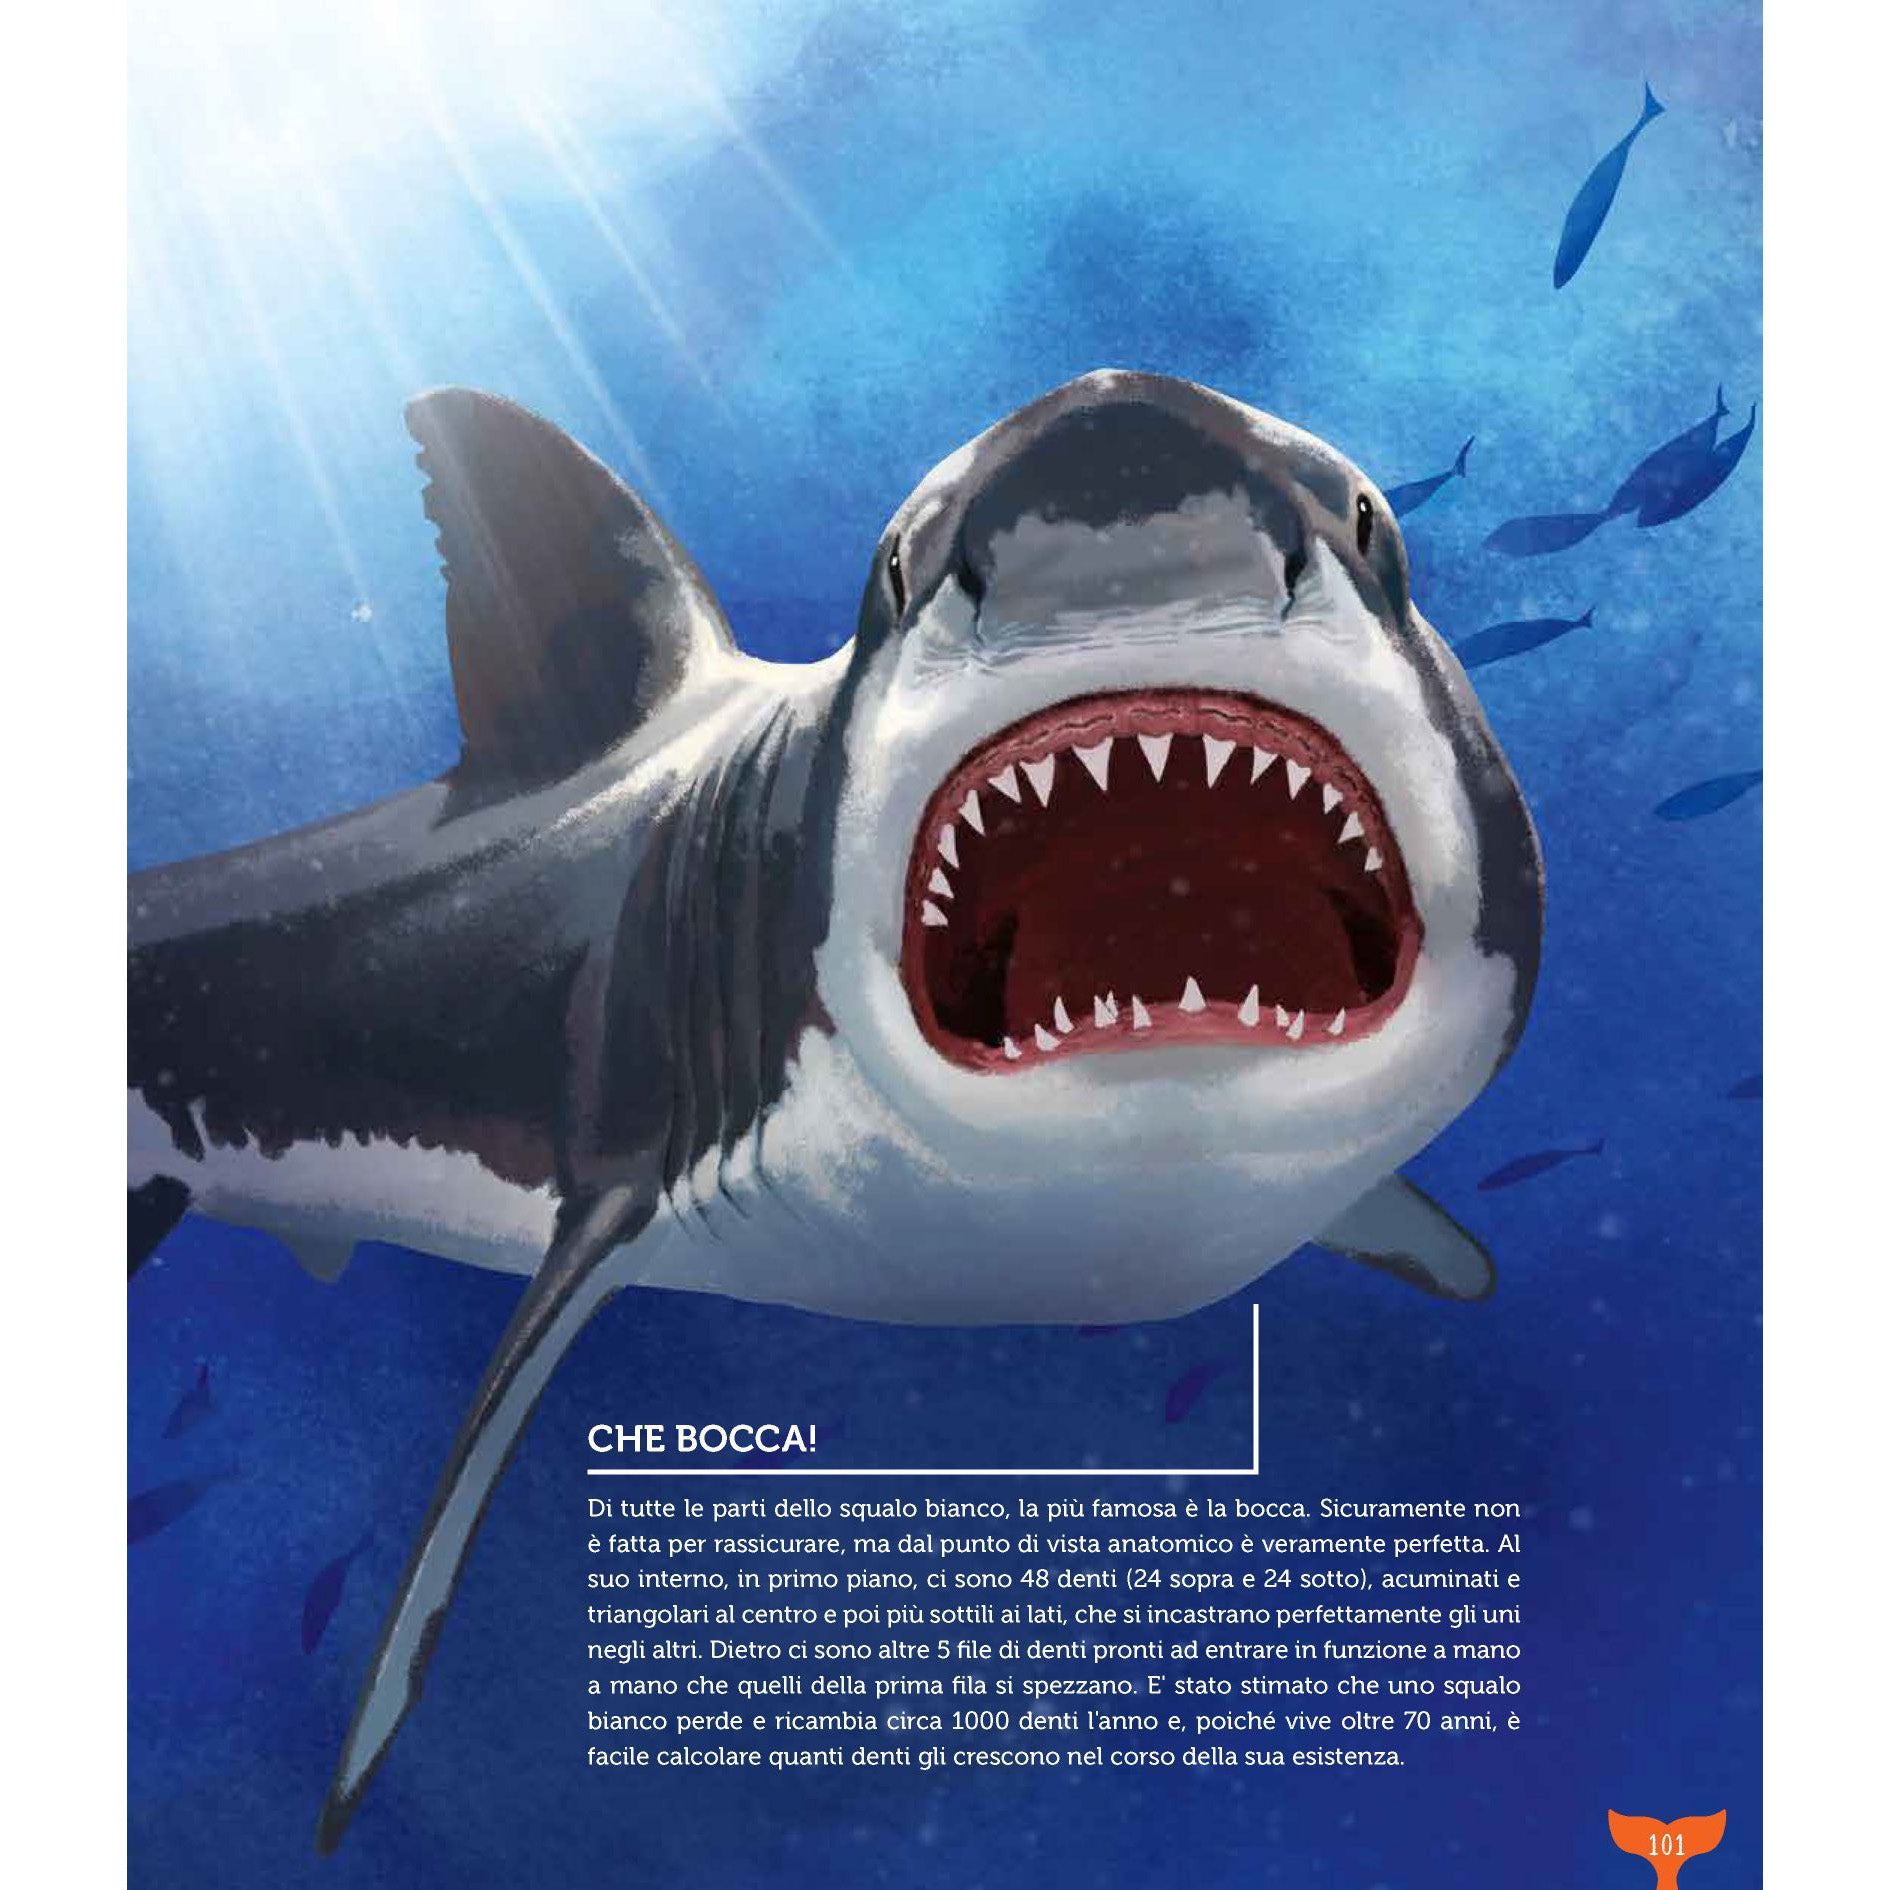 XXL Ocean - Sharks, whales, killer whales, squid and other giants of the sea